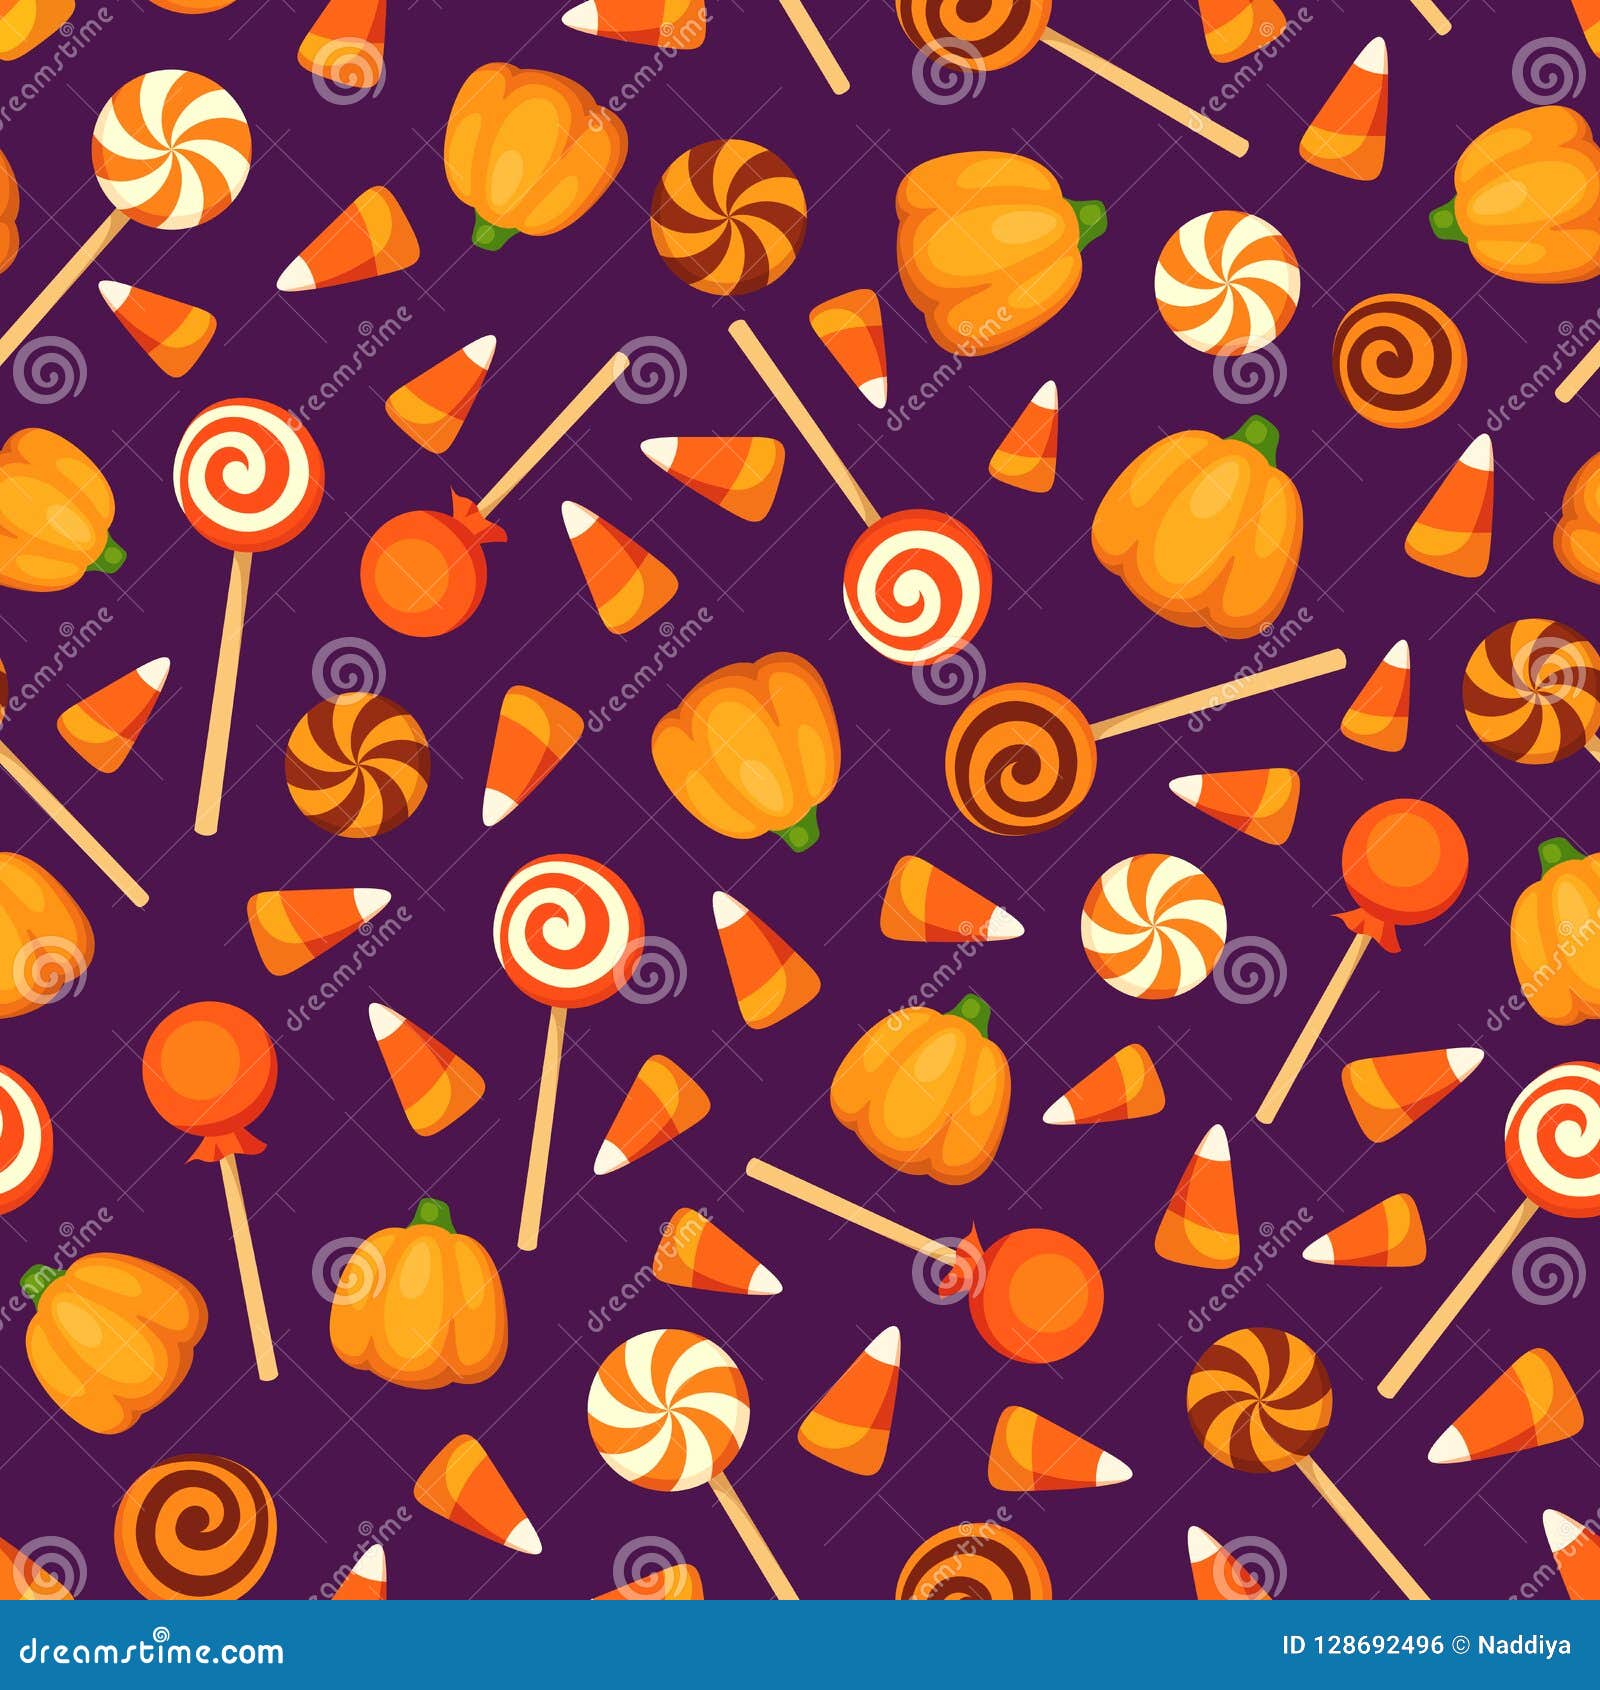 Candies Wallpaper Stock Illustrations  4887 Candies Wallpaper Stock  Illustrations Vectors  Clipart  Dreamstime